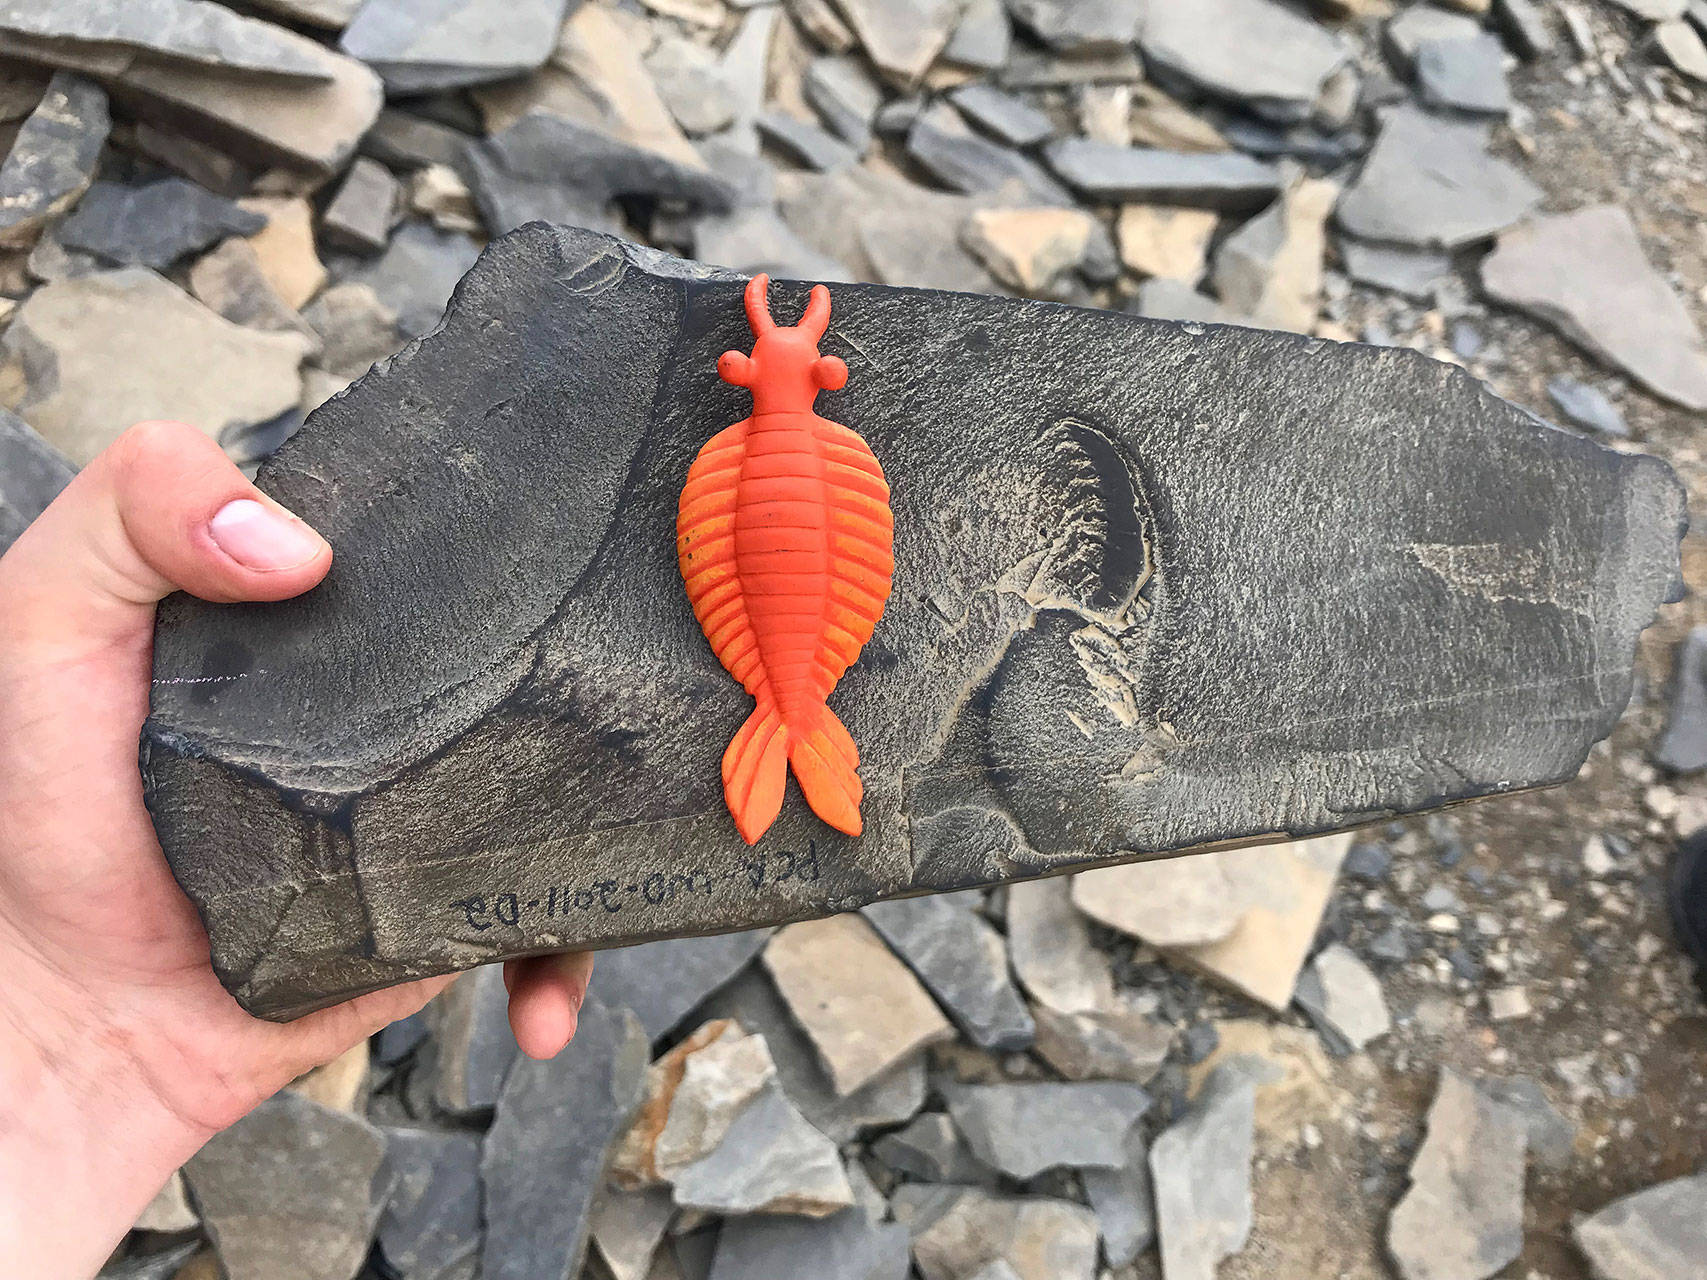 Louis Krauss | Grays Harbor News Group                                A fossil of Anomalocaris, or abnormal shrimp, at the Burgess Shale site in the Canadian Rockies, where numerous fossils as old as 508 million years can be found. The orange toy is a replica of what the creature might have looked like.